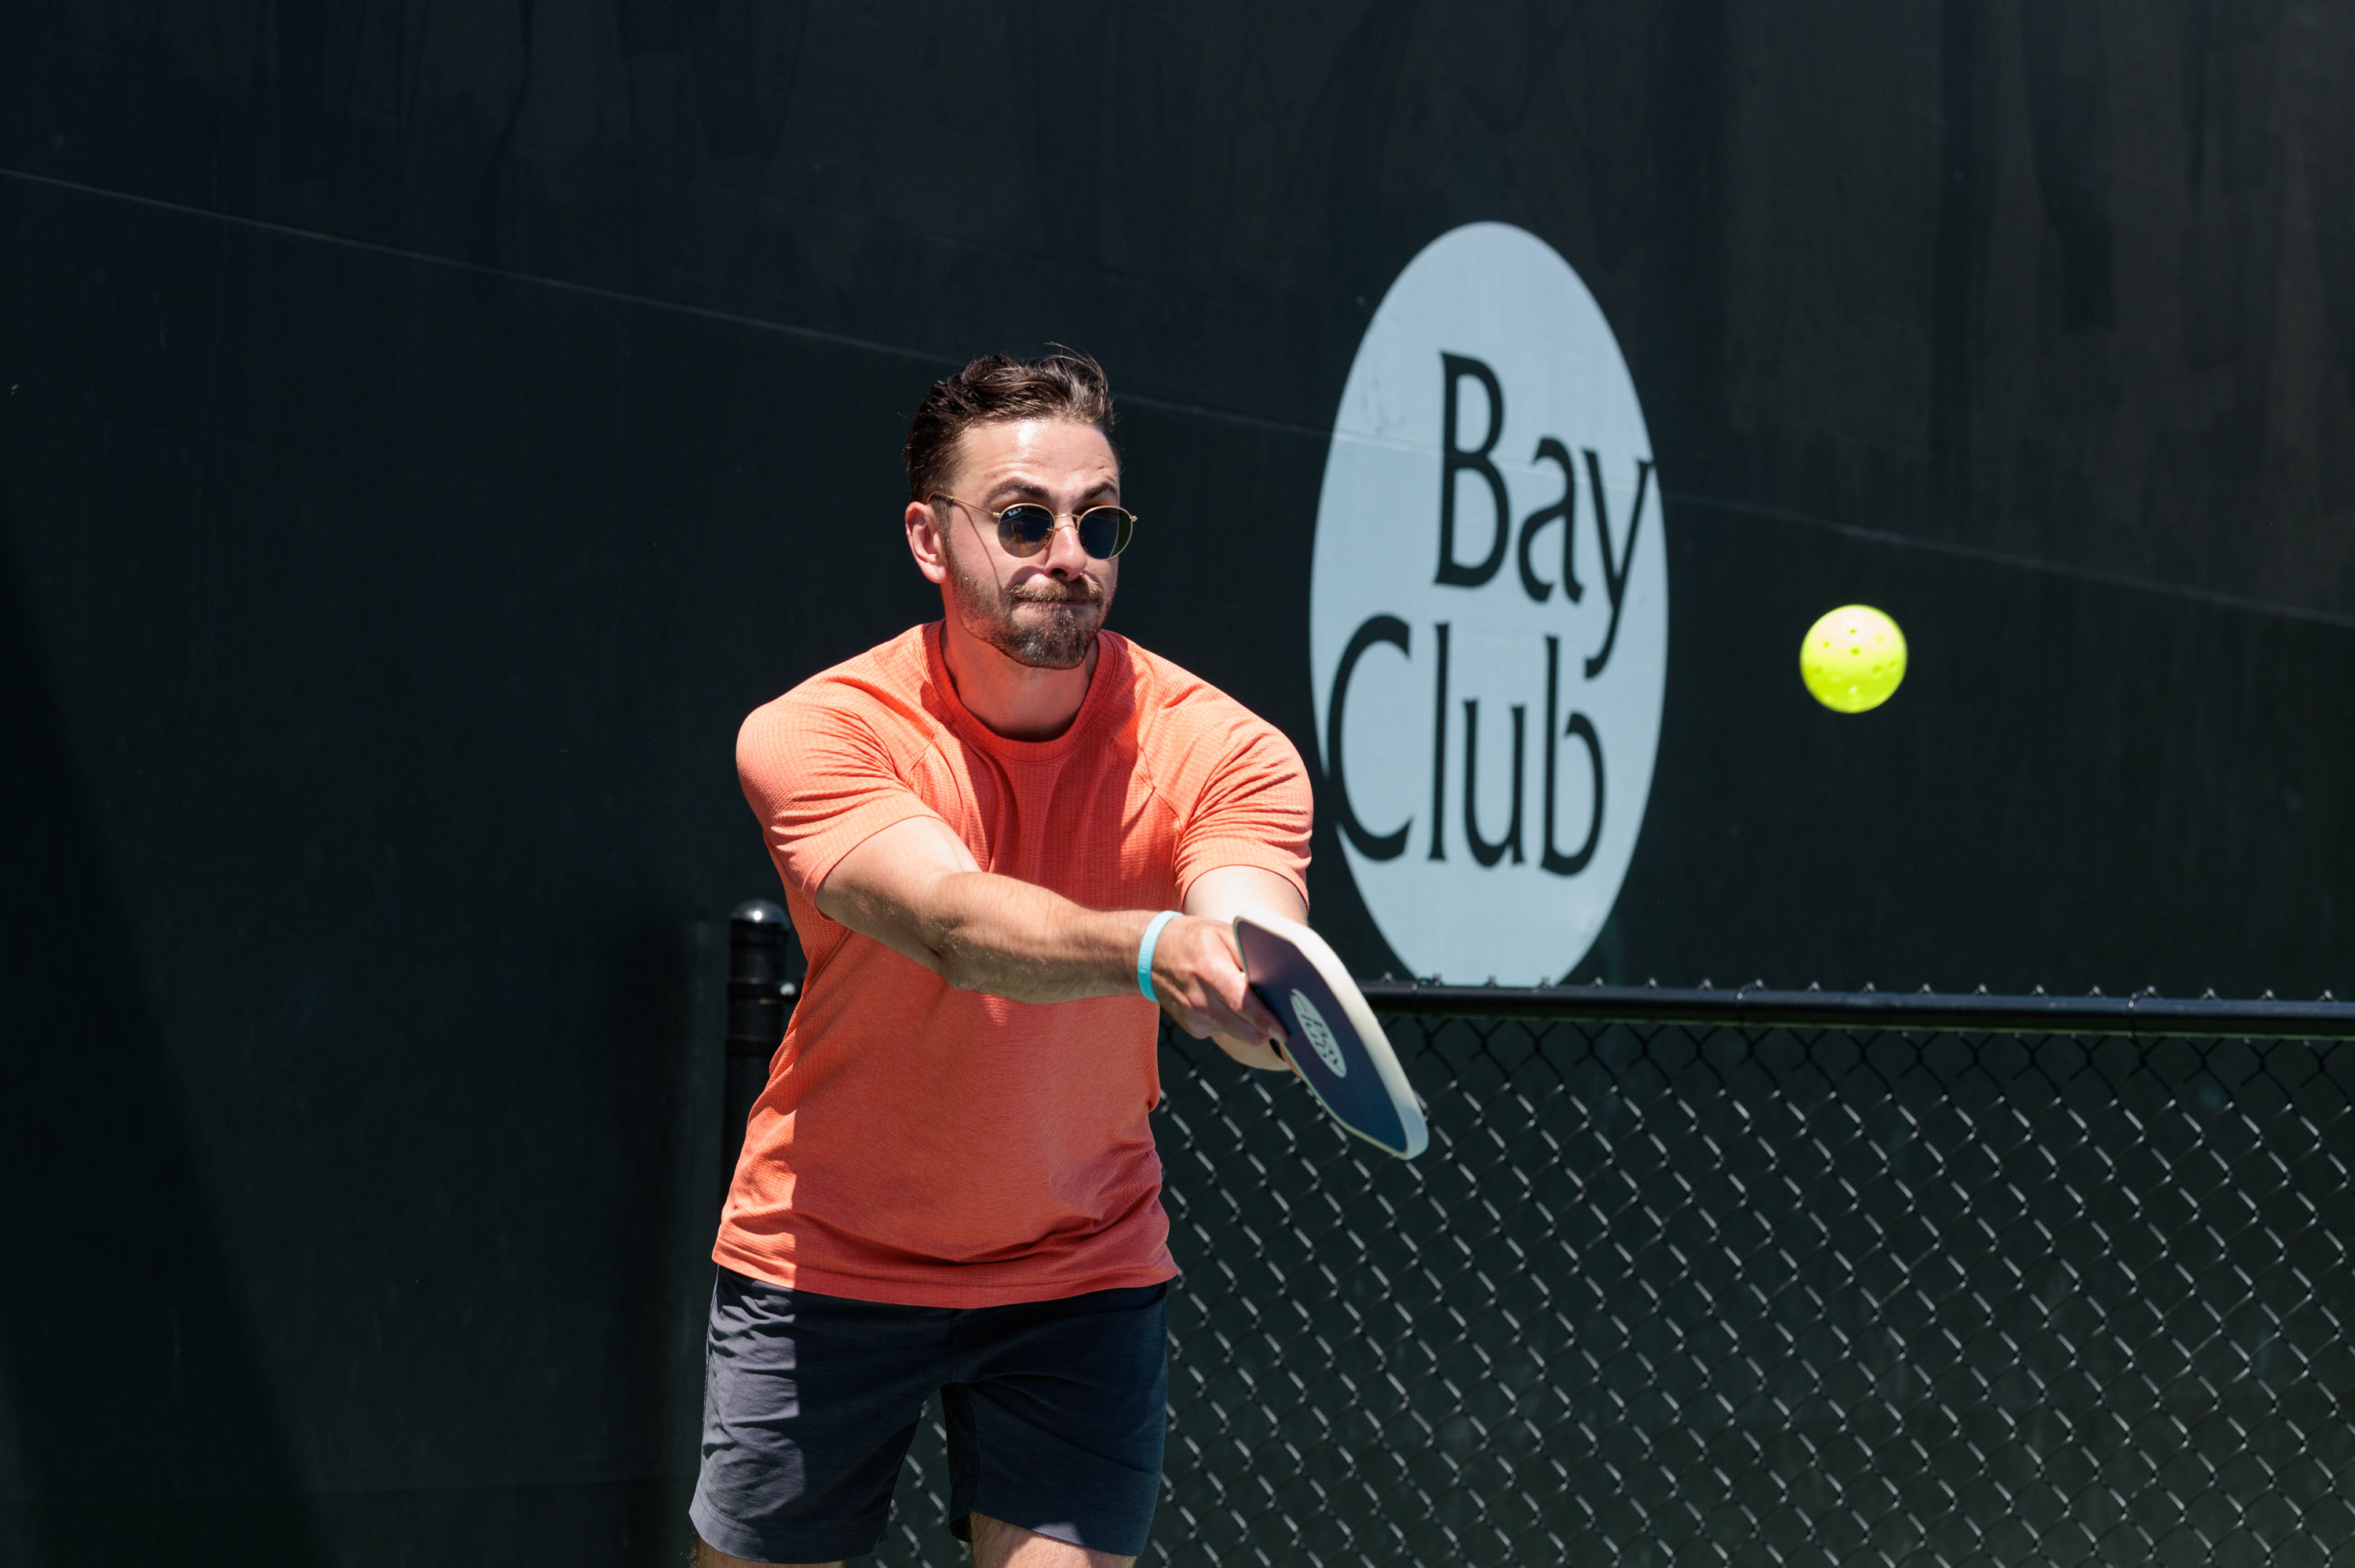 A man plays pickleball, in orange shirt and sunglasses, with a focused expression.